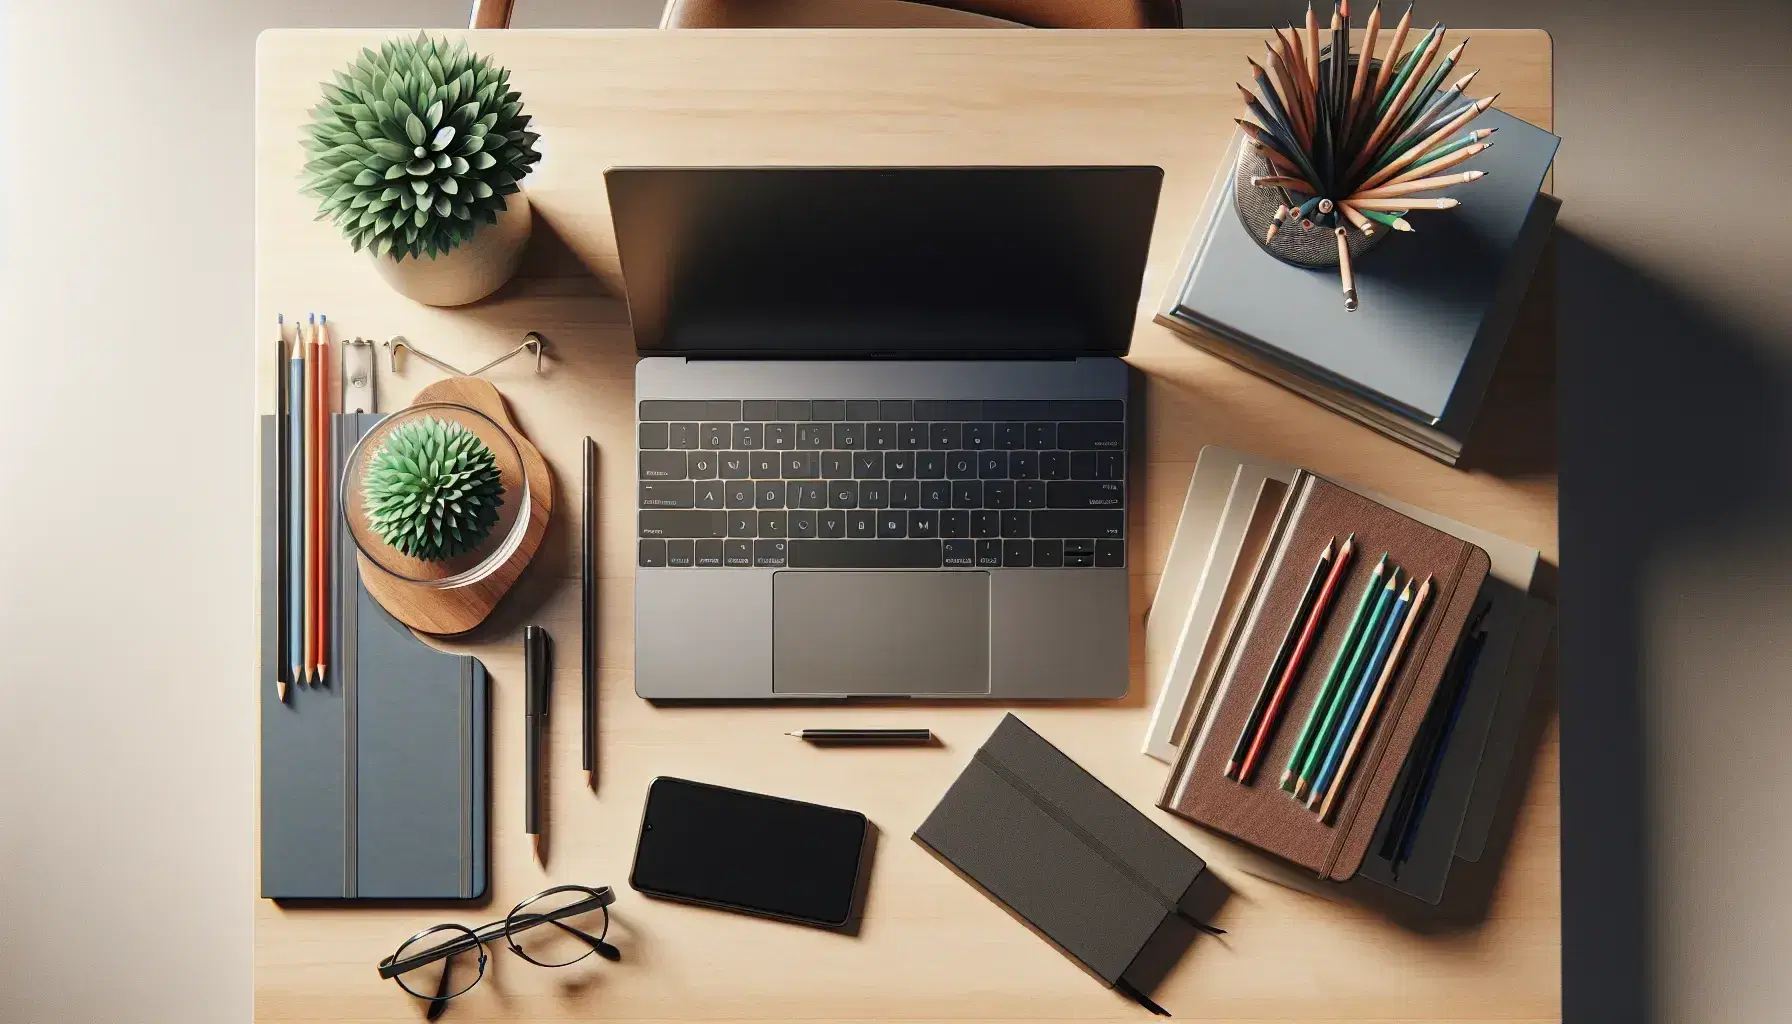 Organized desk with open laptop, blue notebook, black smartphone, glass with colored pens, green plant and eyeglasses.